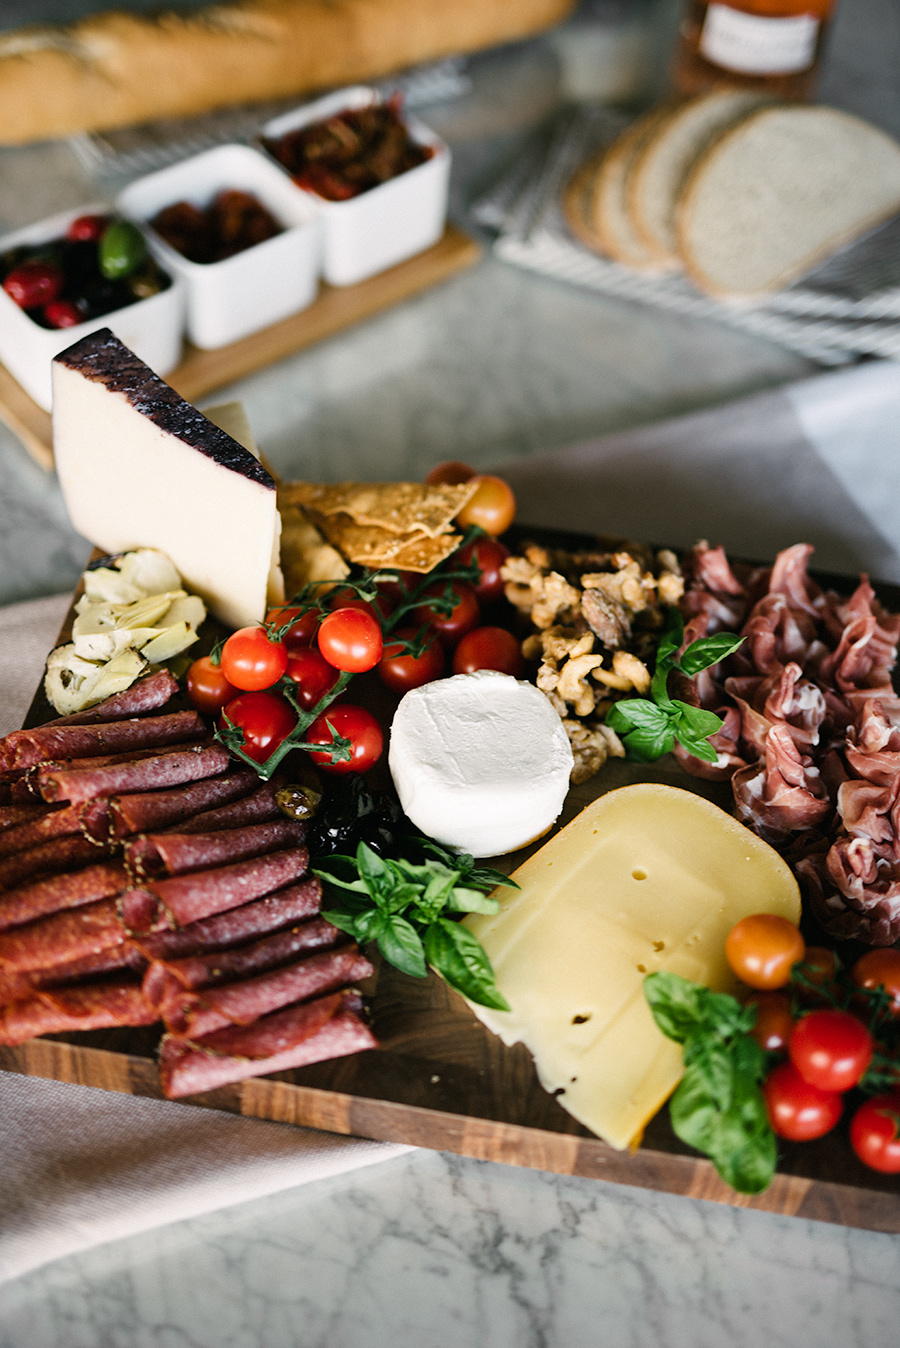 how to make the best charcuterie board food foodie blog entertaining not your standard meat cheese blogger kayla seah